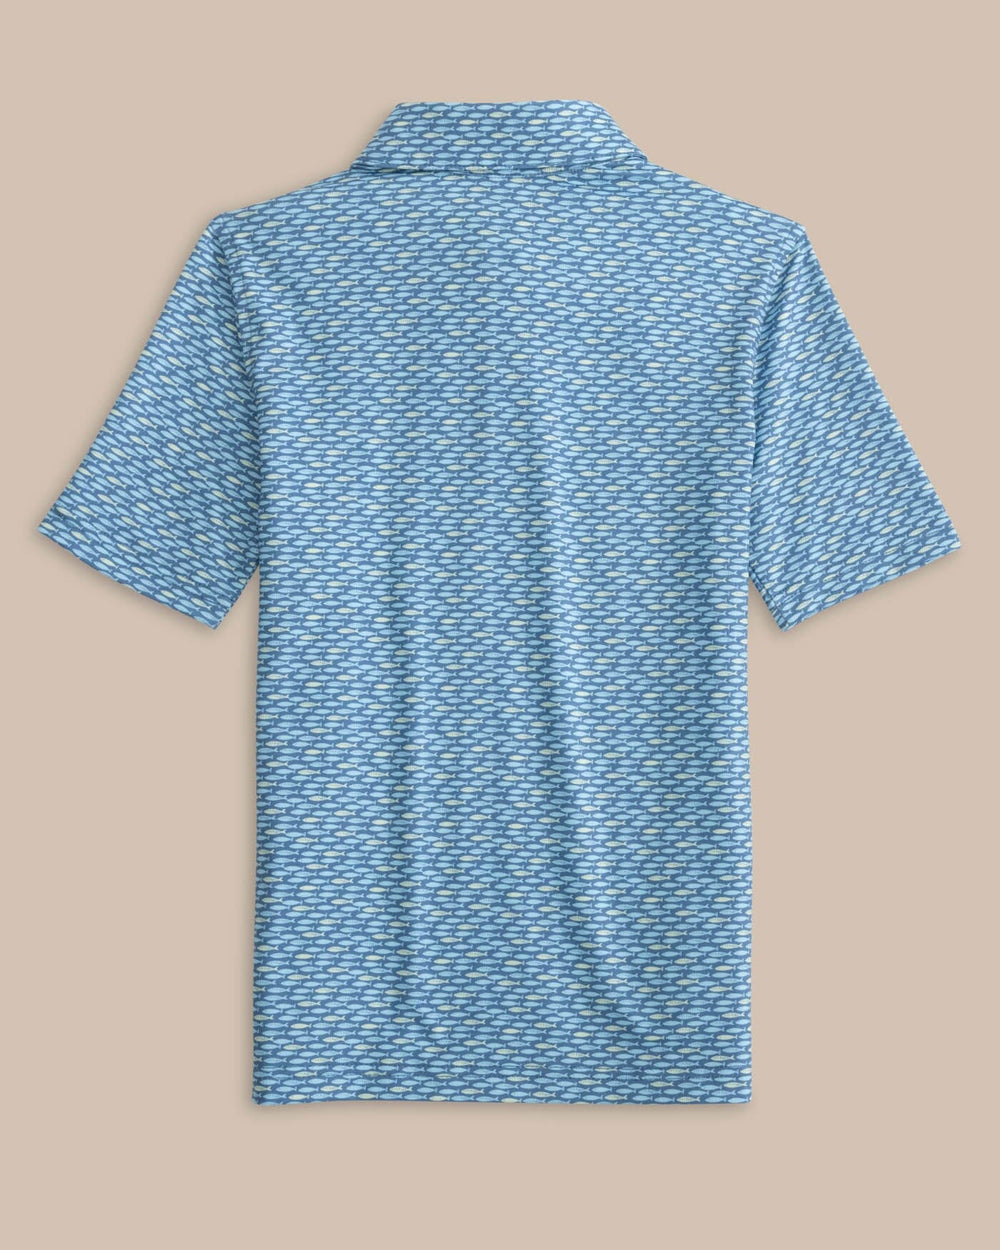 The back view of the Southern Tide Youth Driver Casual Water Printed Polo by Southern Tide - Coronet Blue